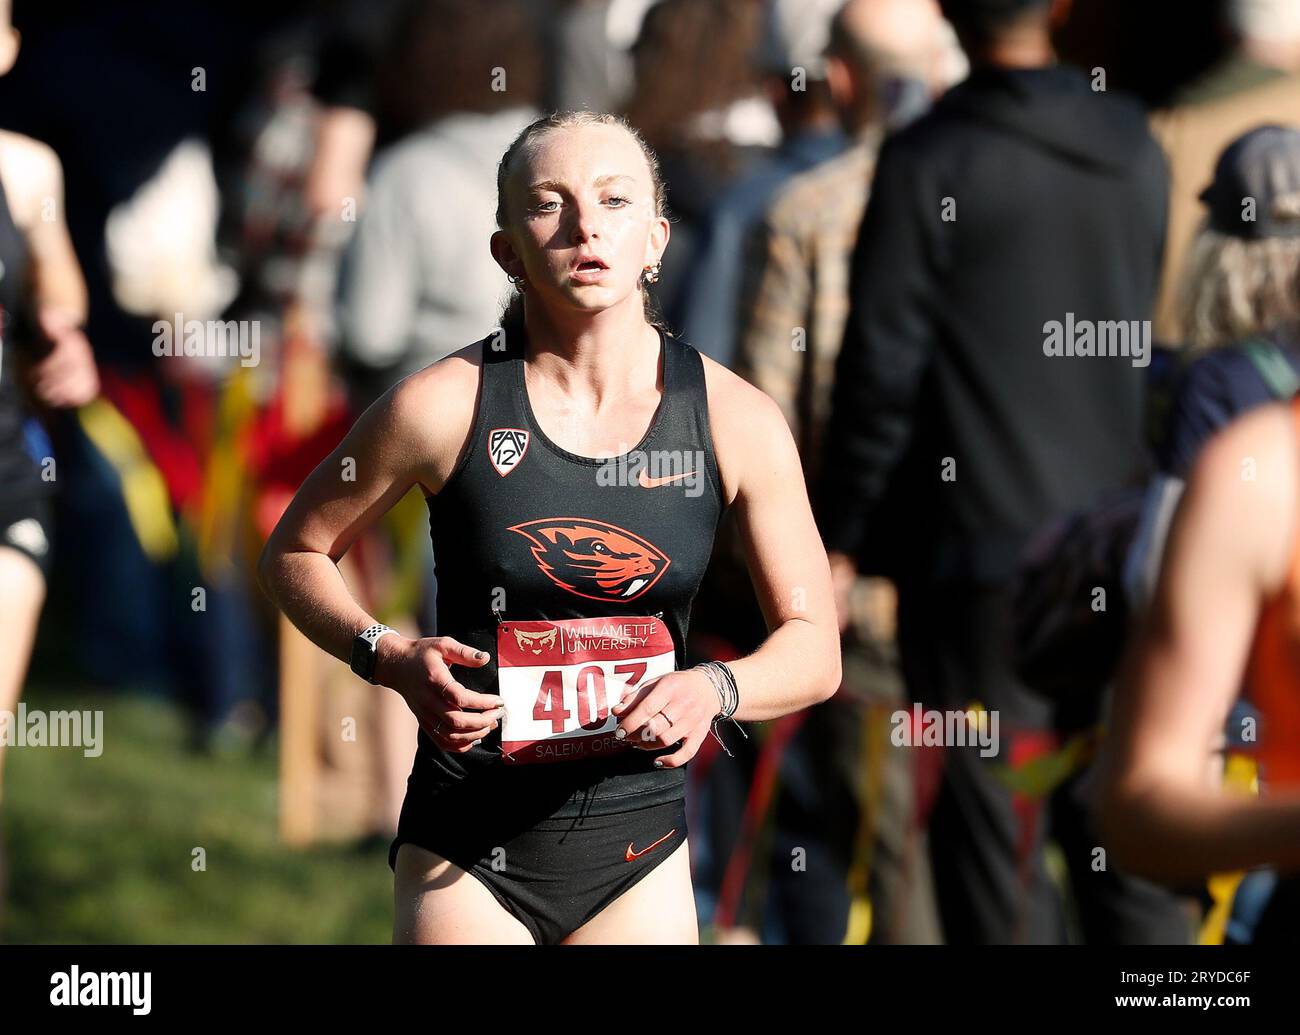 Bush Park, Salem, OR, USA. 30th Sep, 2023. Erin Cosgrove of Oregon State University competes at the 2023 Charles Bowles Invitational Cross Country meet at Bush Park, Salem, OR. Larry C. Lawson/CSM (Credit Image: © Larry C. Lawson/Cal Sport Media). Credit: csm/Alamy Live News Stock Photo